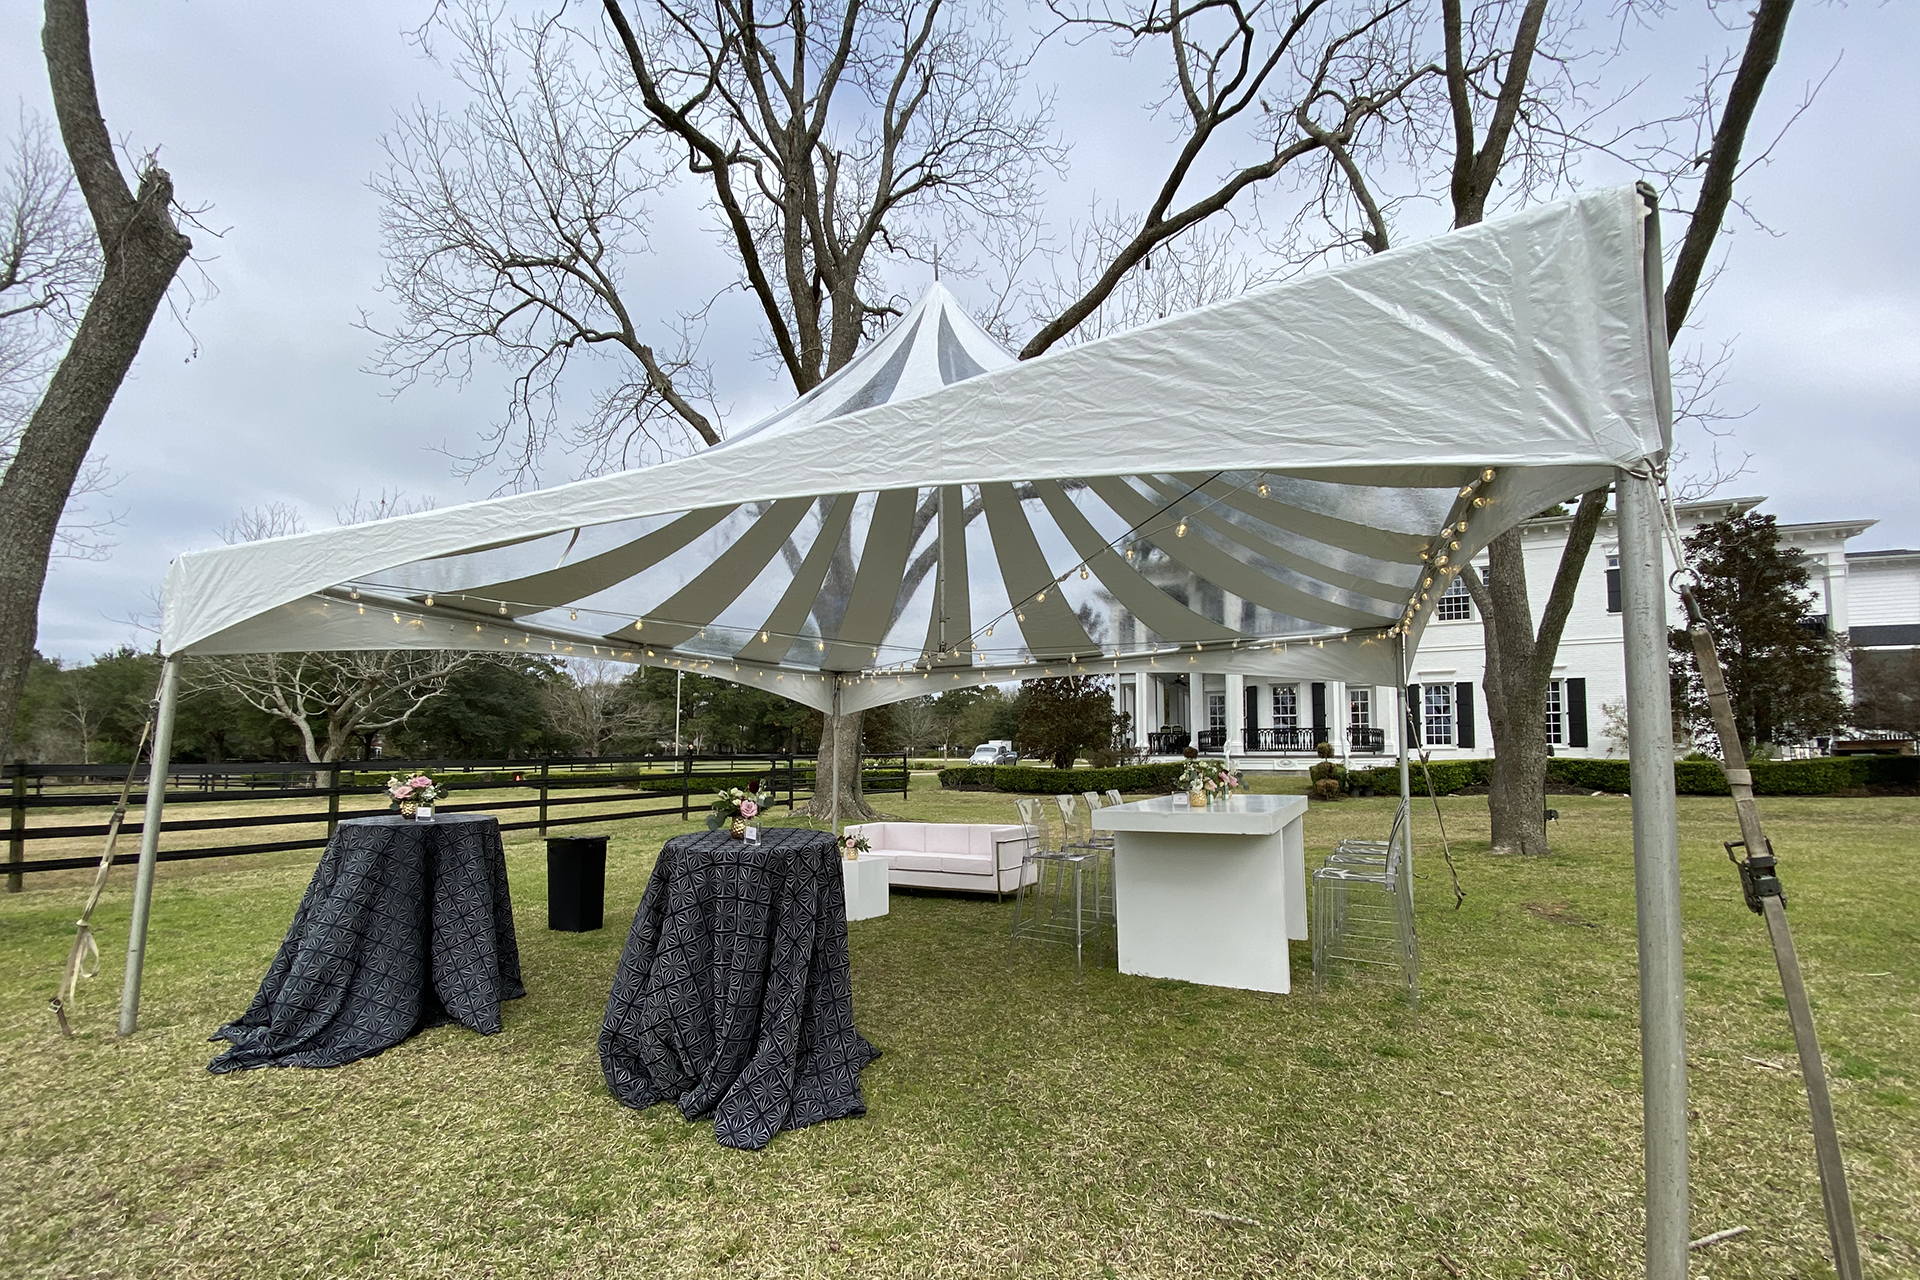 Contact Us Static Slider Image of Stargazer tent and black and white lounge rentals